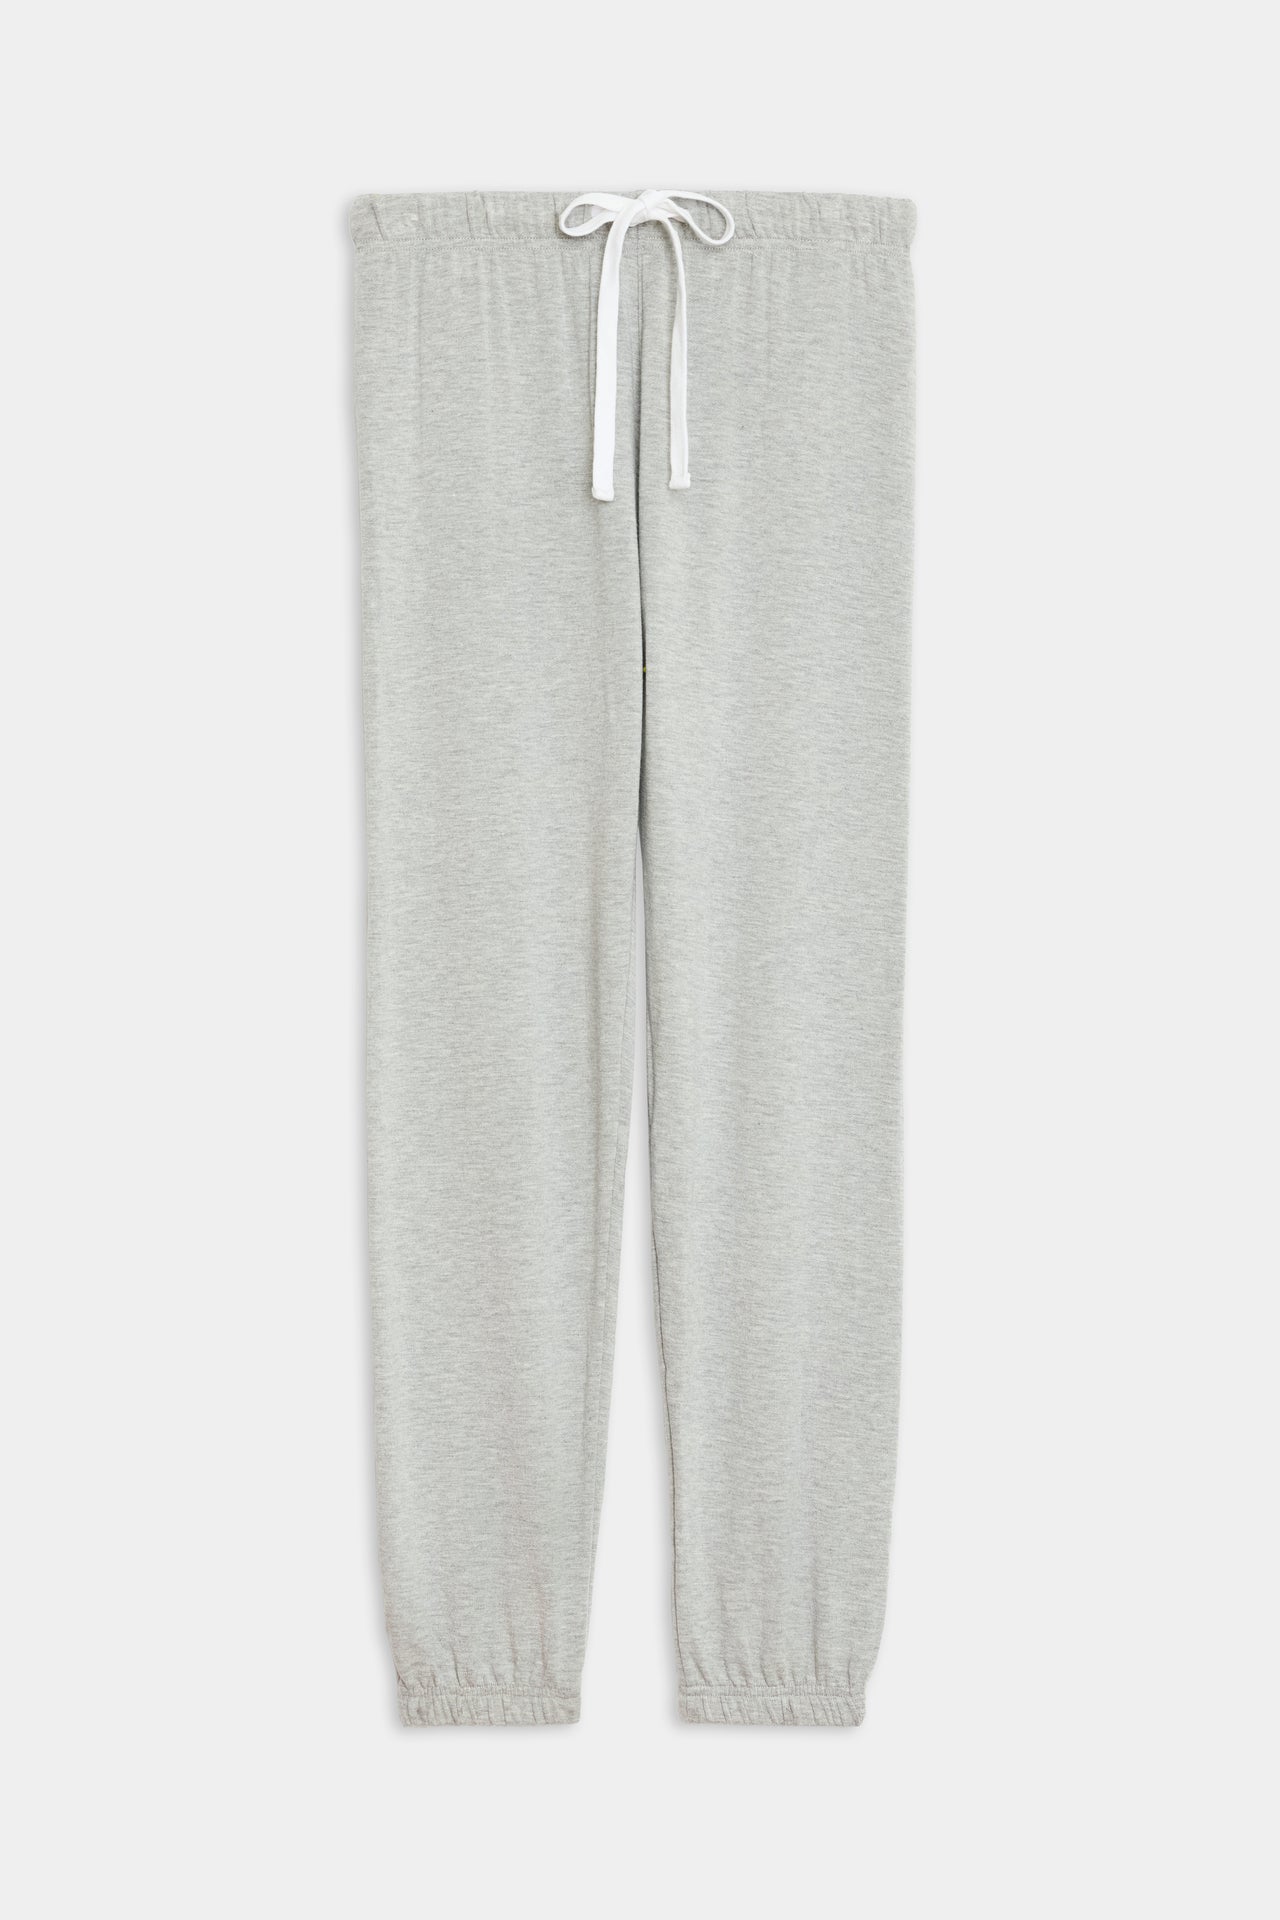 Front flat view of light grey sweatpant jogger with white drawstring